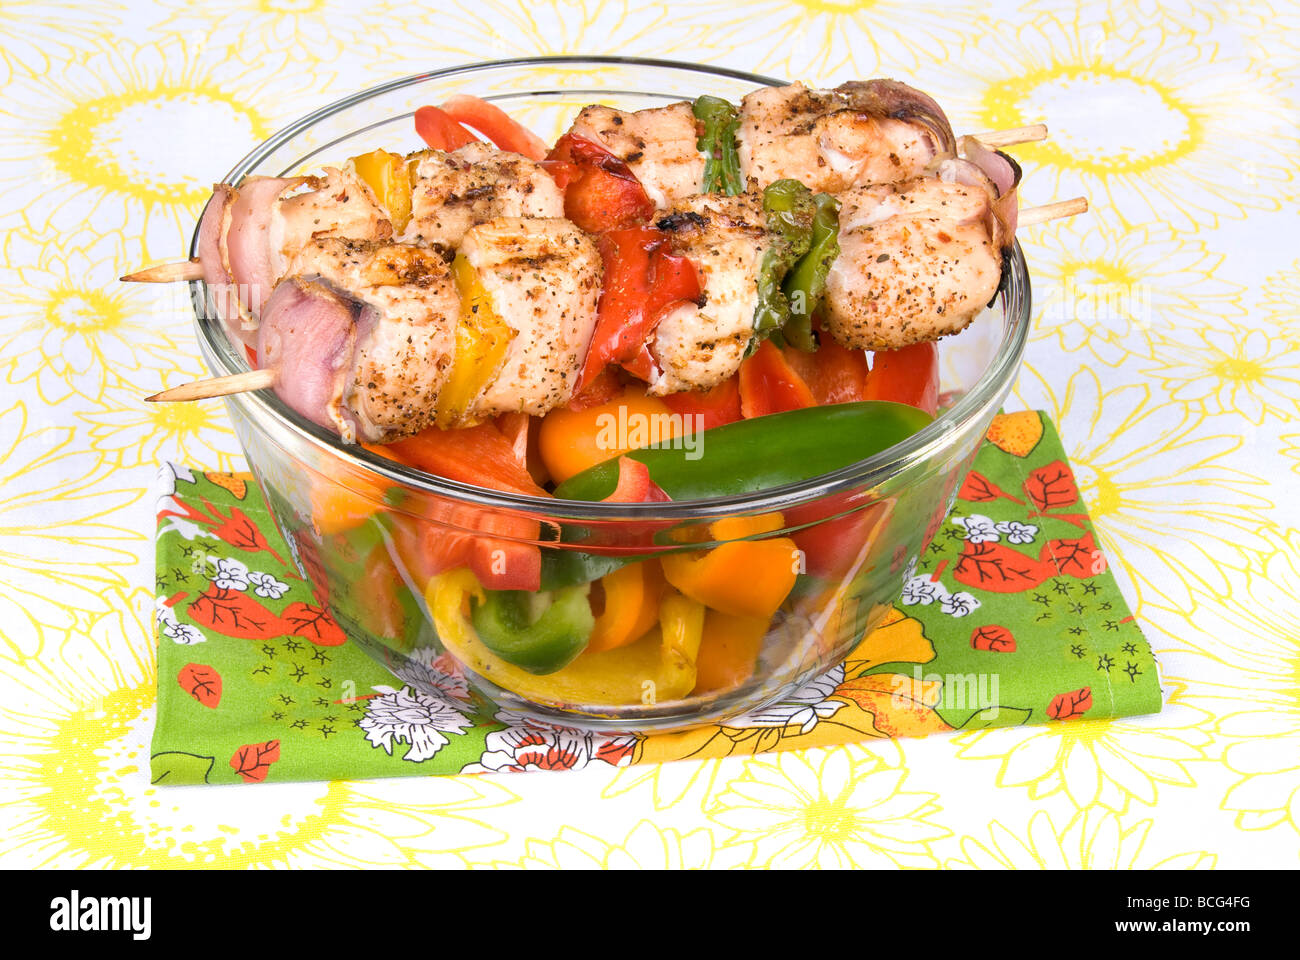 Freshly barbecued skewers of chicken kebobs with bell peppers and onions on a bowl of fresh bell peppers for snacking Stock Photo